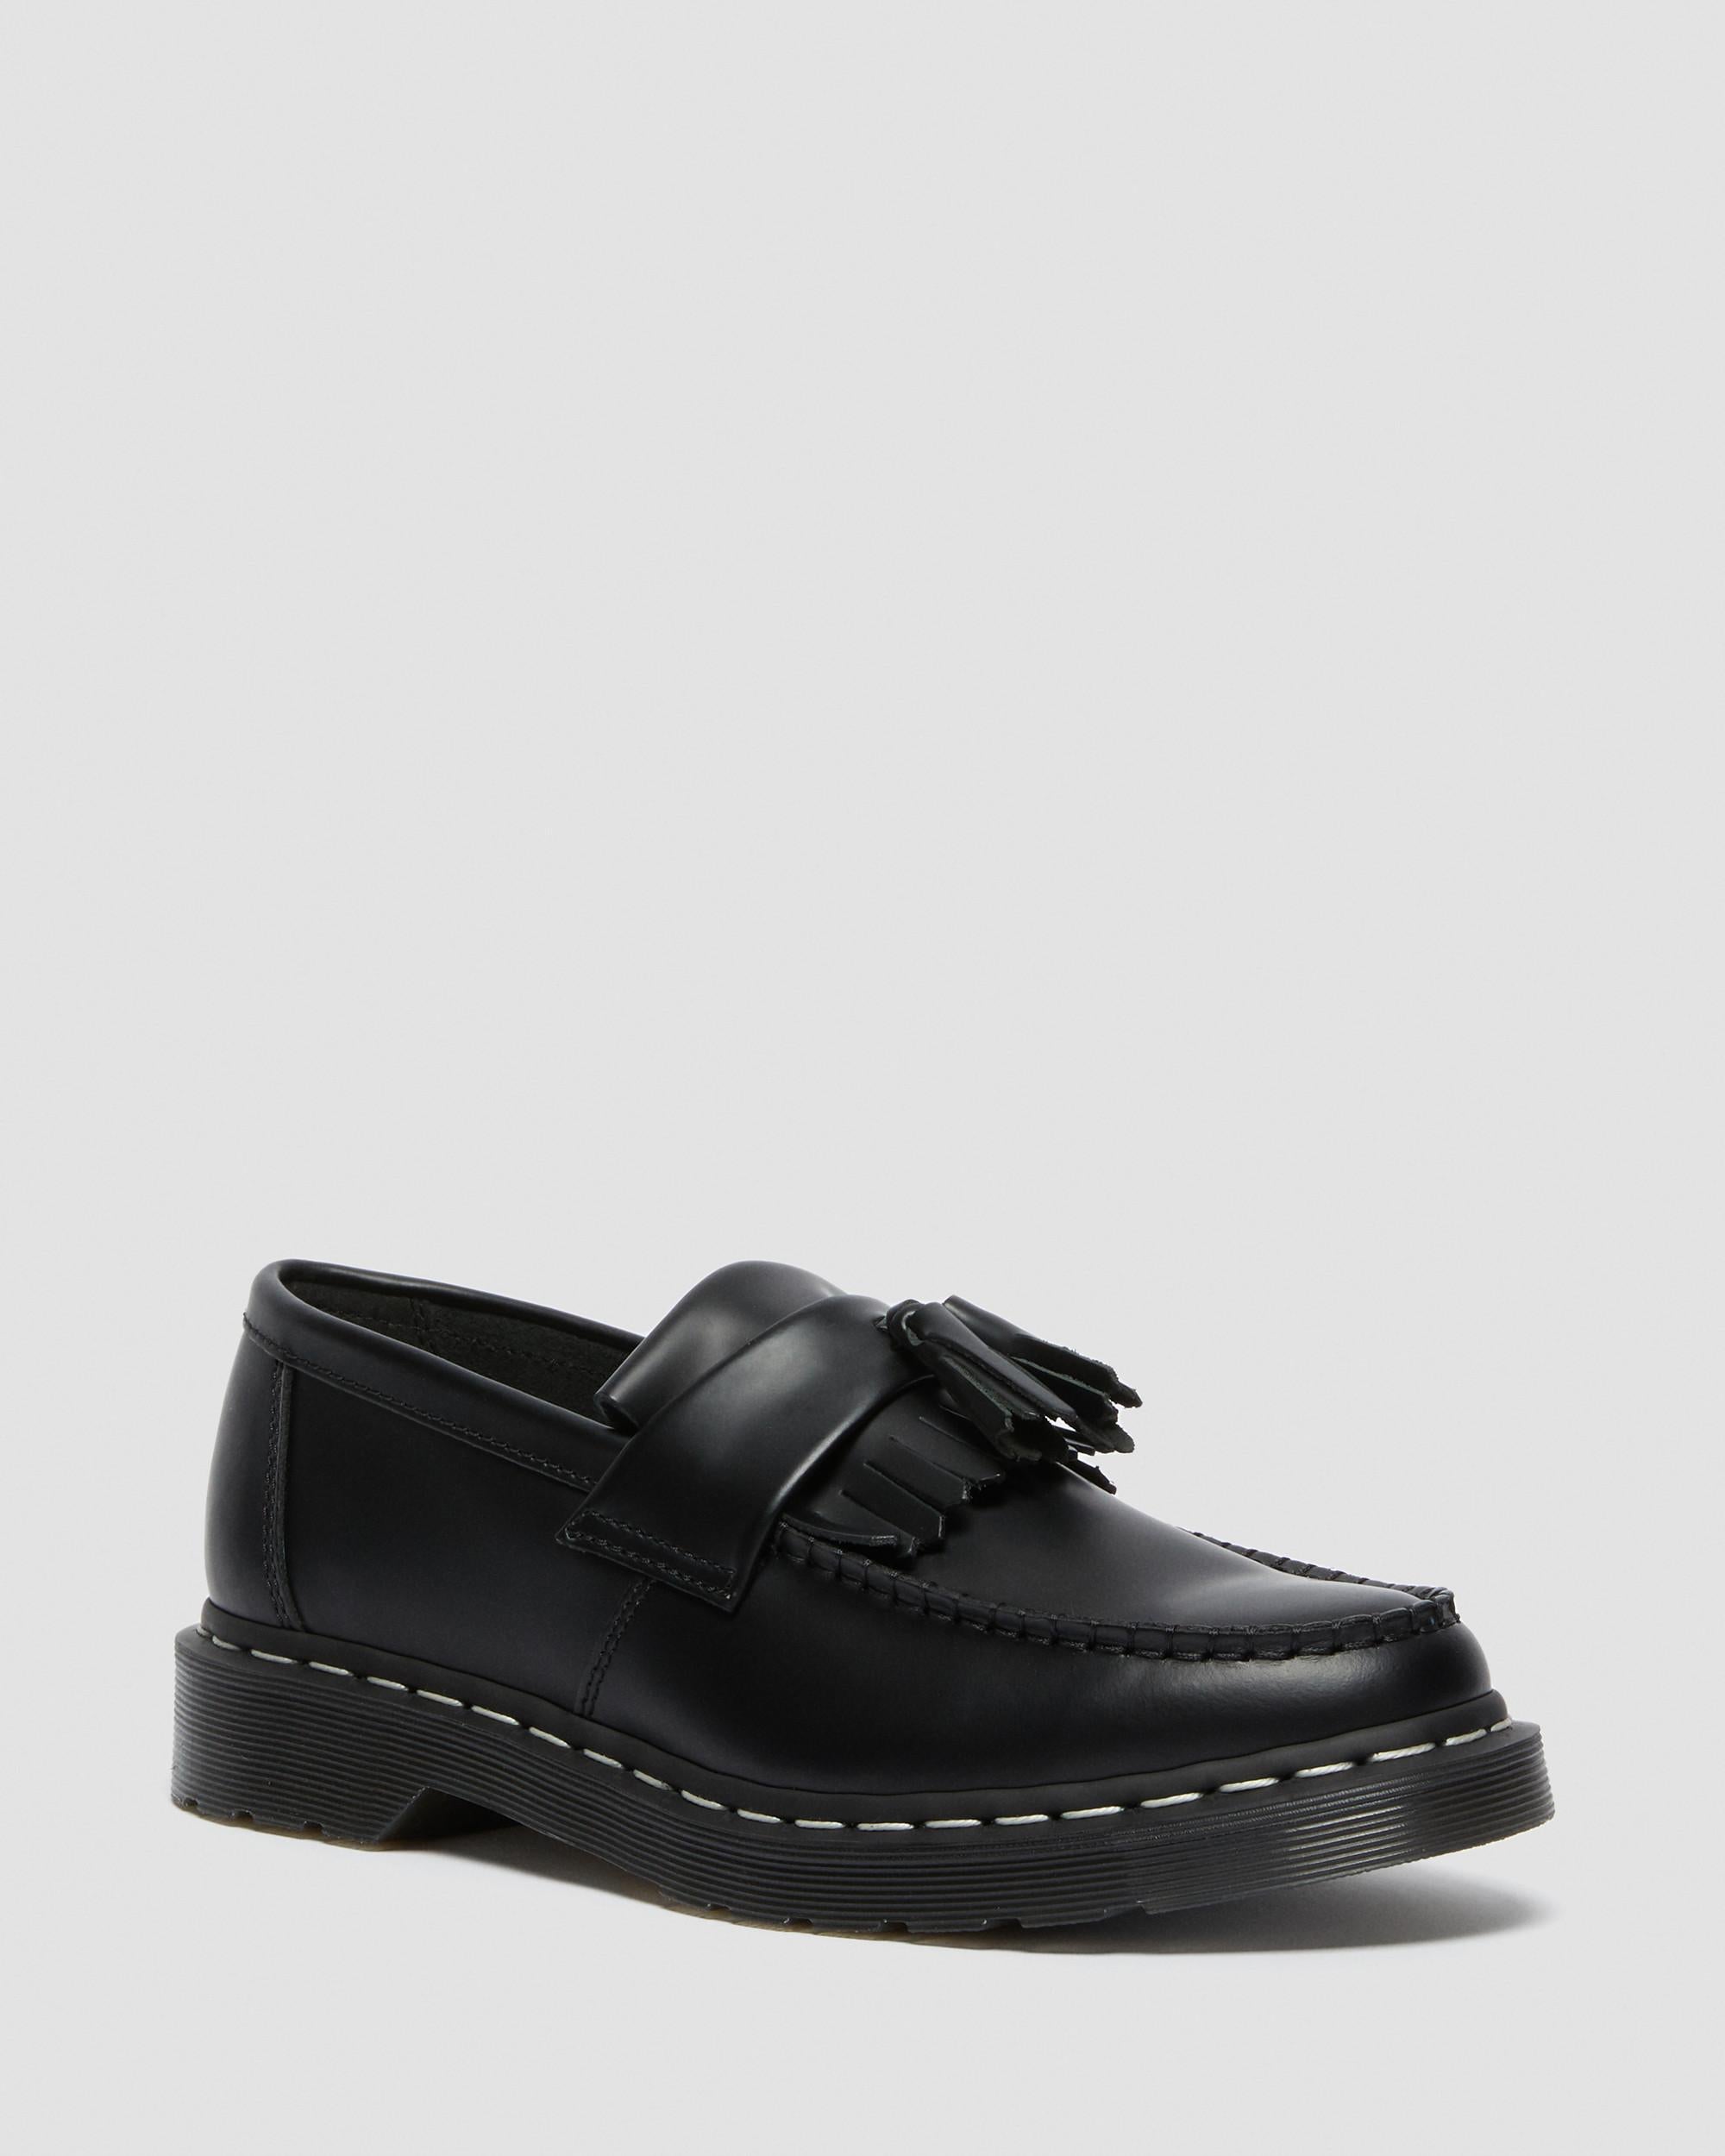 ADRIAN WHITE STITCH SMOOTH LEATHER SHOES